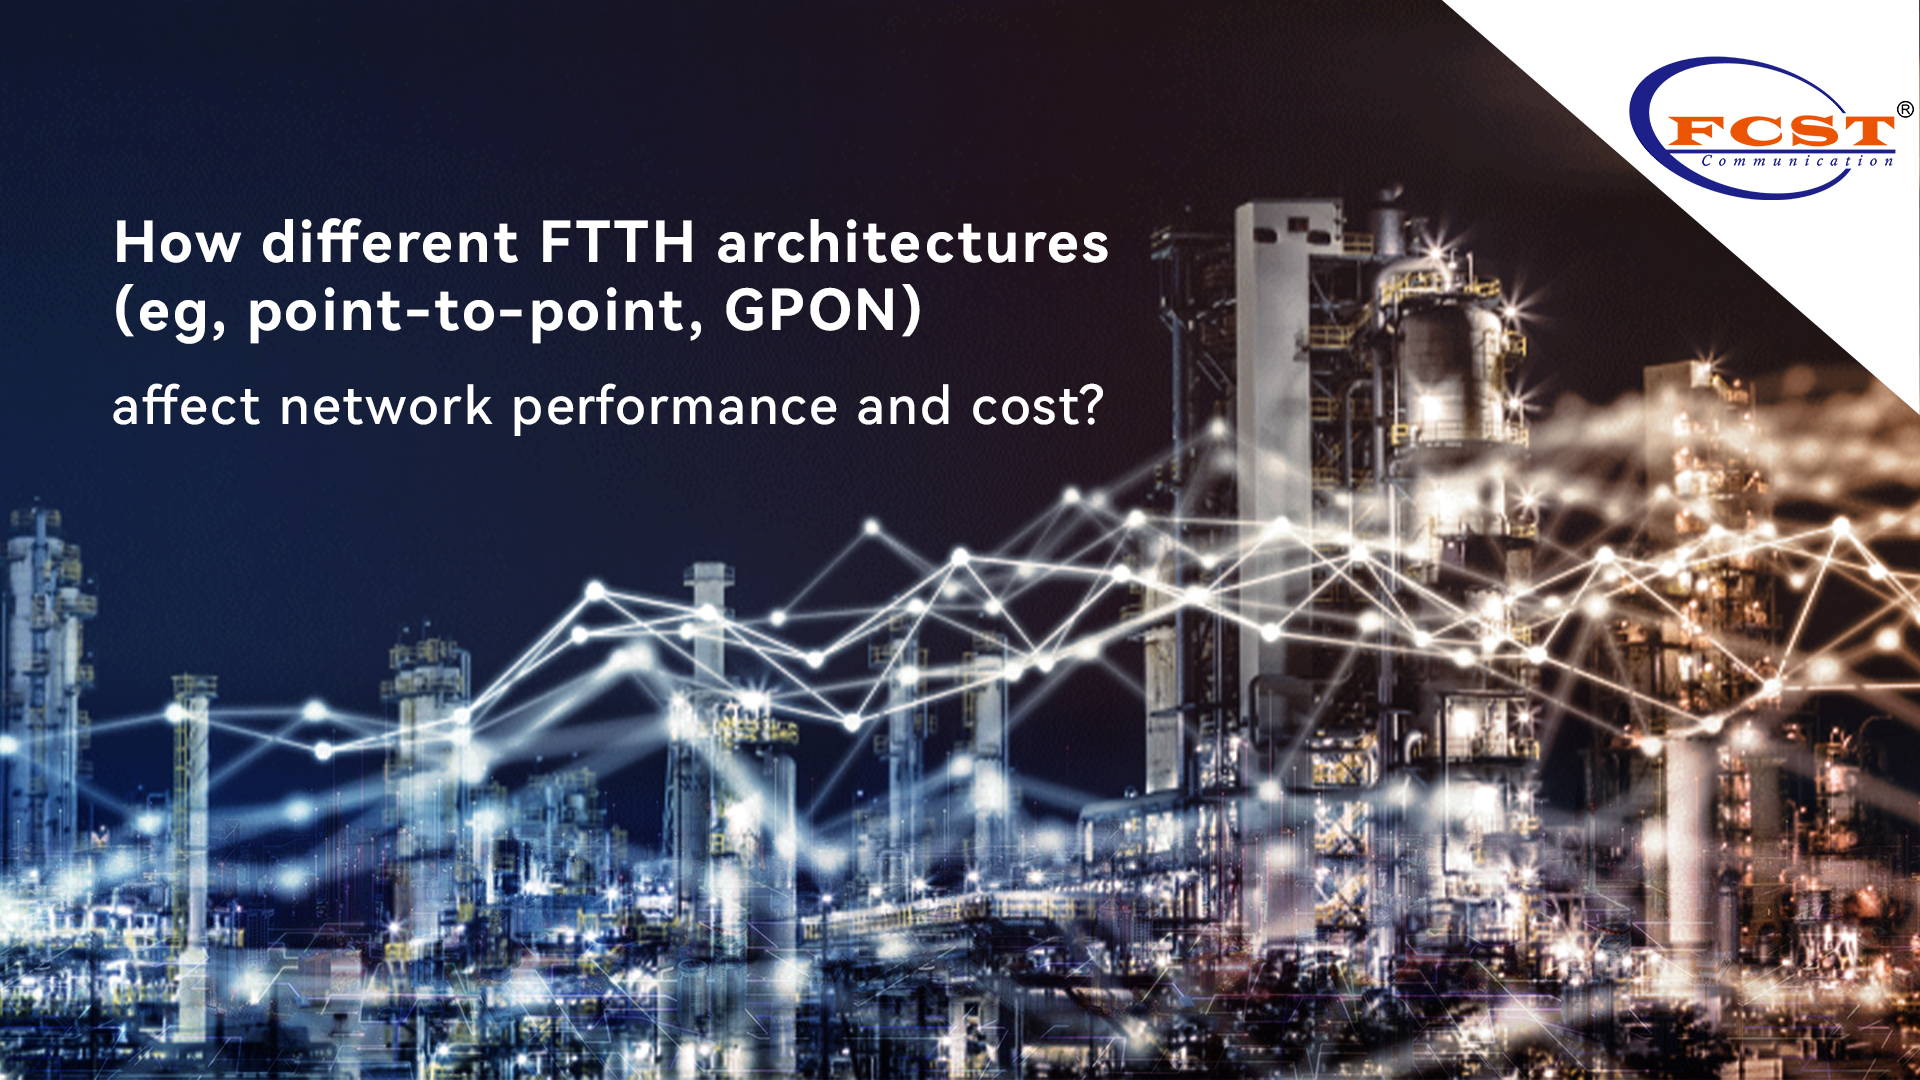 How do different FTTH architectures (eg, point-to-point, GPON) affect network performance and cost?